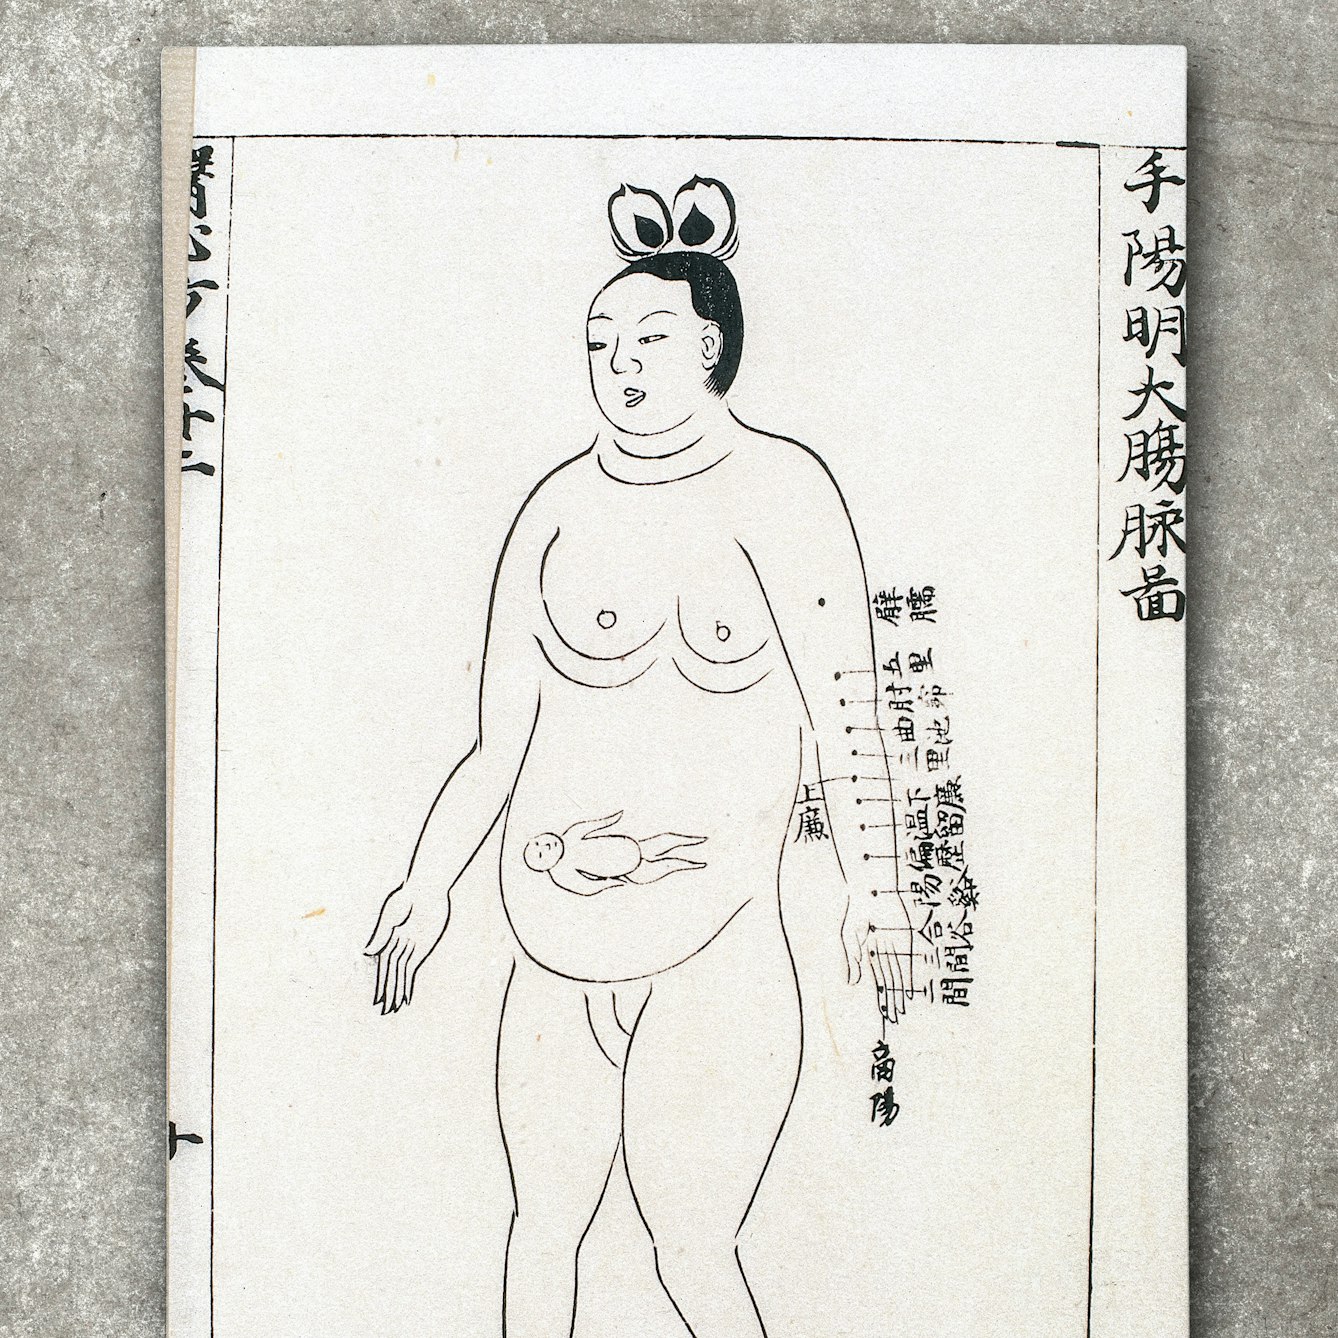 Photograph of a chart showing locations on the large Intestine channel of arm yangming where acupuncture is prohibited during the eighth month of pregnancy, from Ishinpo [Chinese: Yi xin fang] (Remedies at the Heart of Medicine), by the Japanese author Yasuyori Tanba. The chart is resting on a concrete textured background.